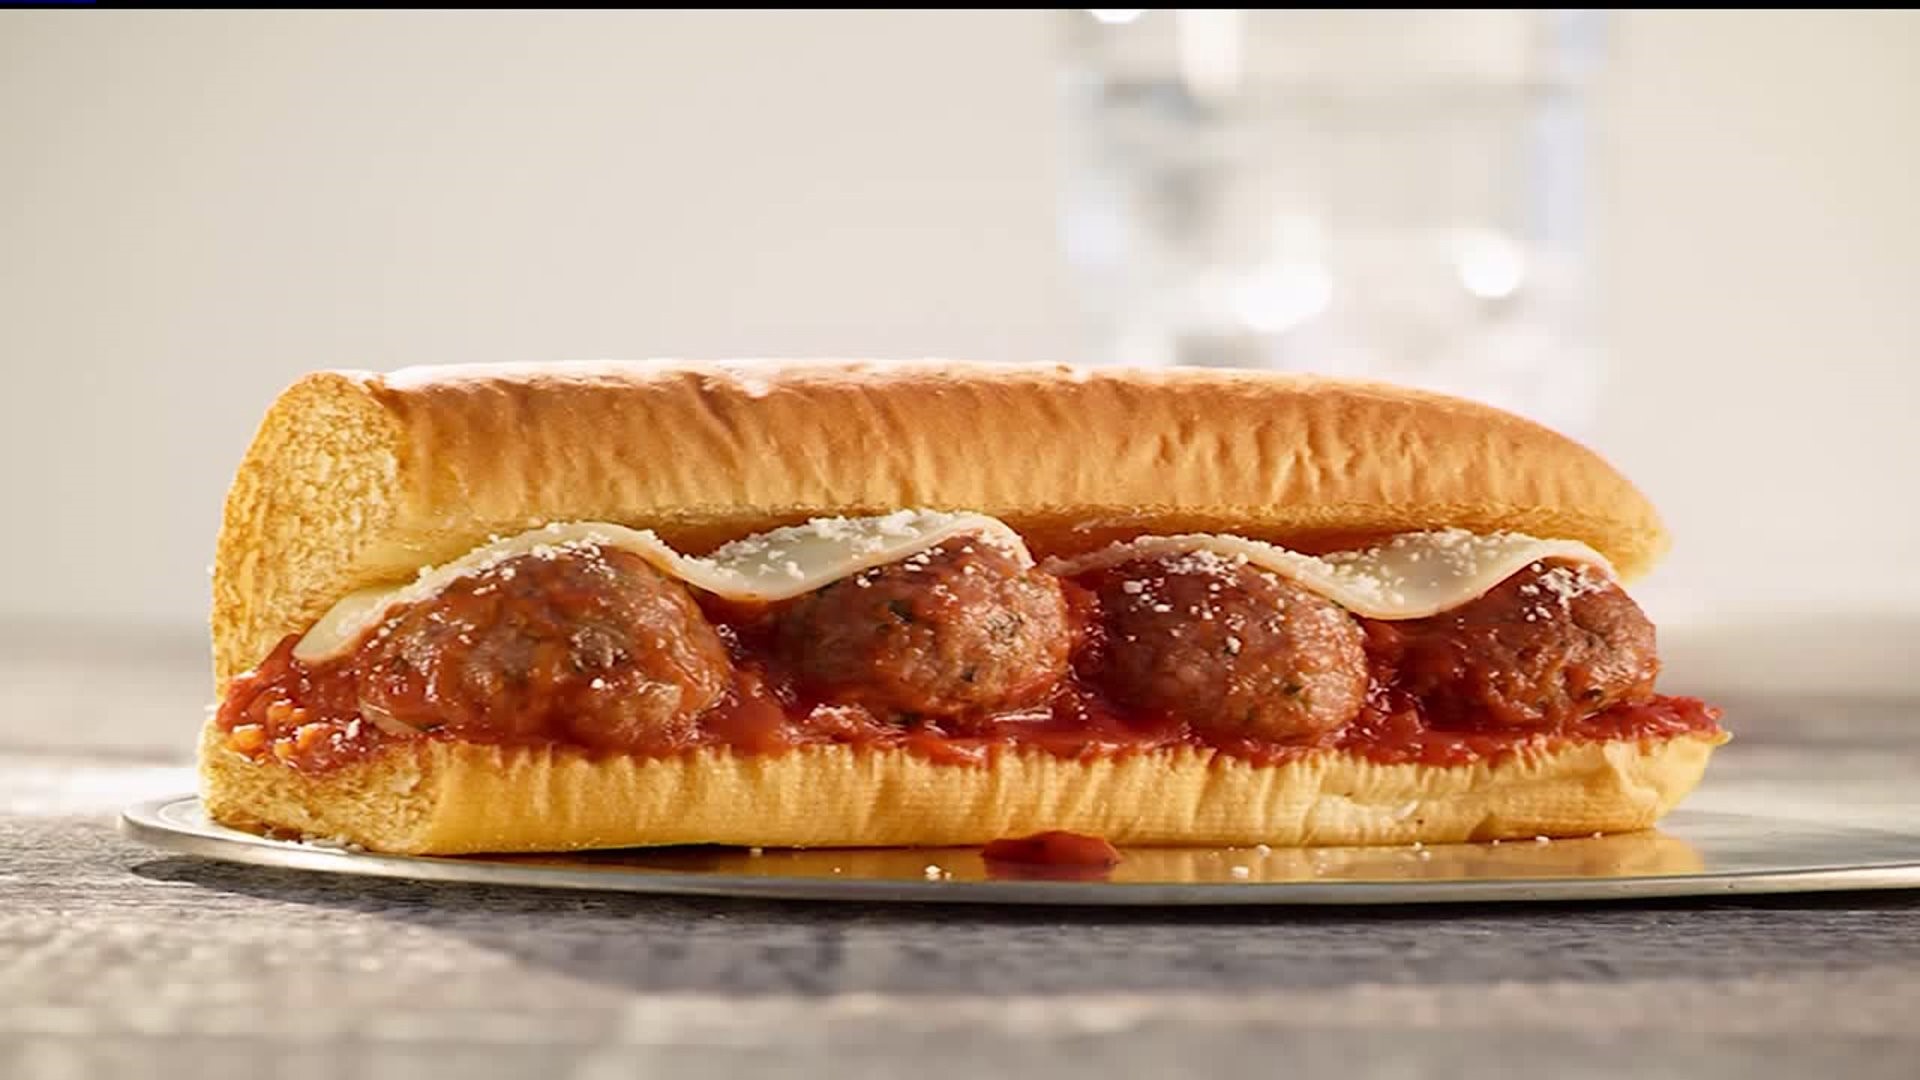 Subway launches meatless meatball sub